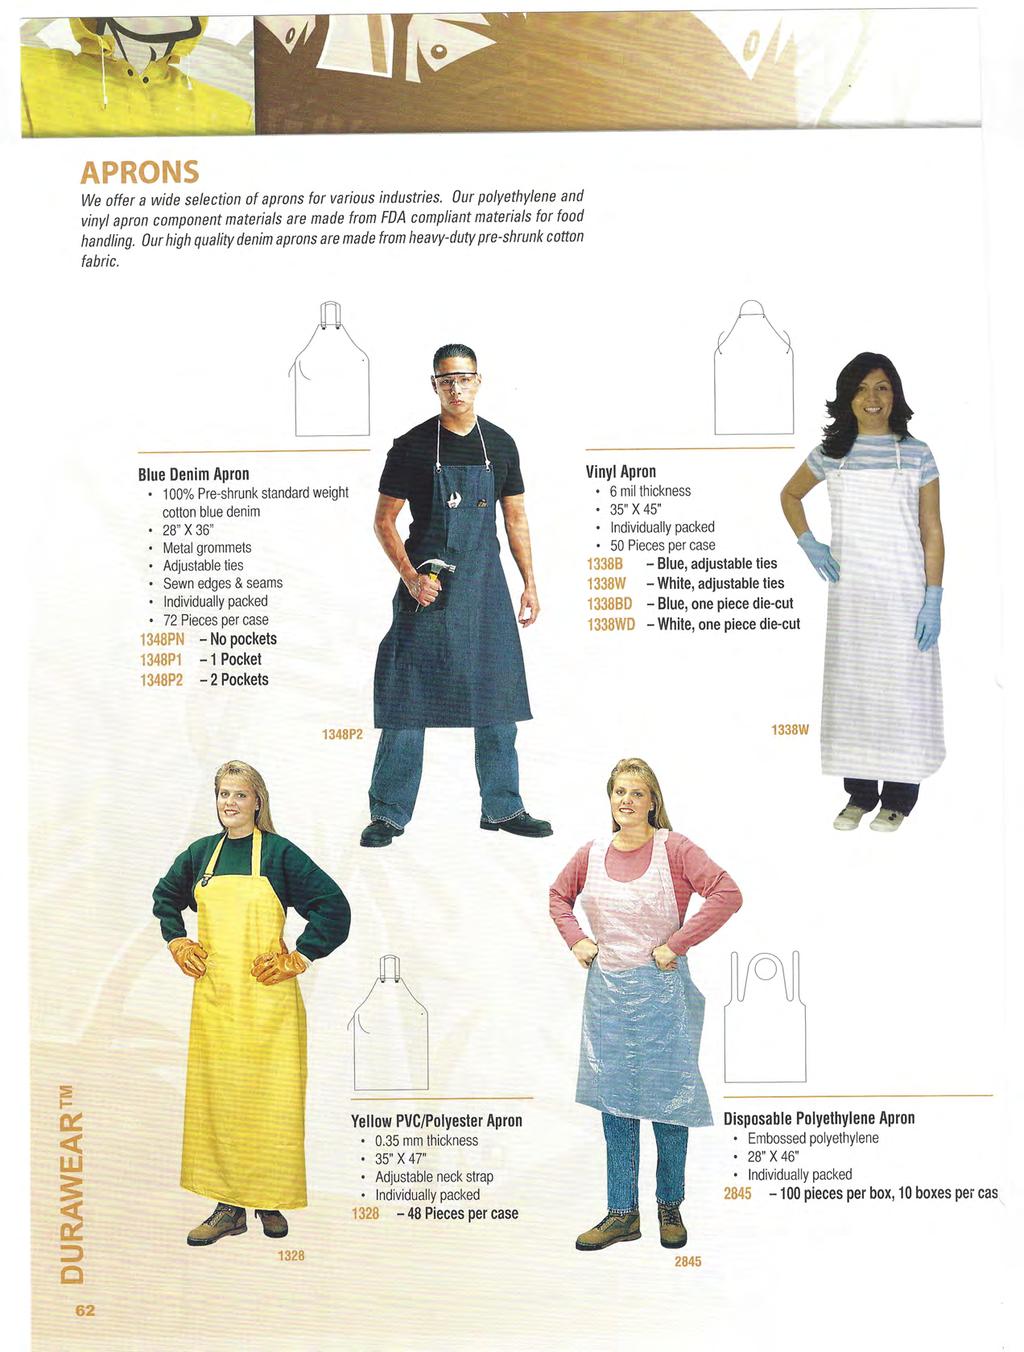 APRONS We offer a wide selection of aprons for various industries. Our polyethylene and vinyl apron component materials are made from FDA compliant materials for food handling.